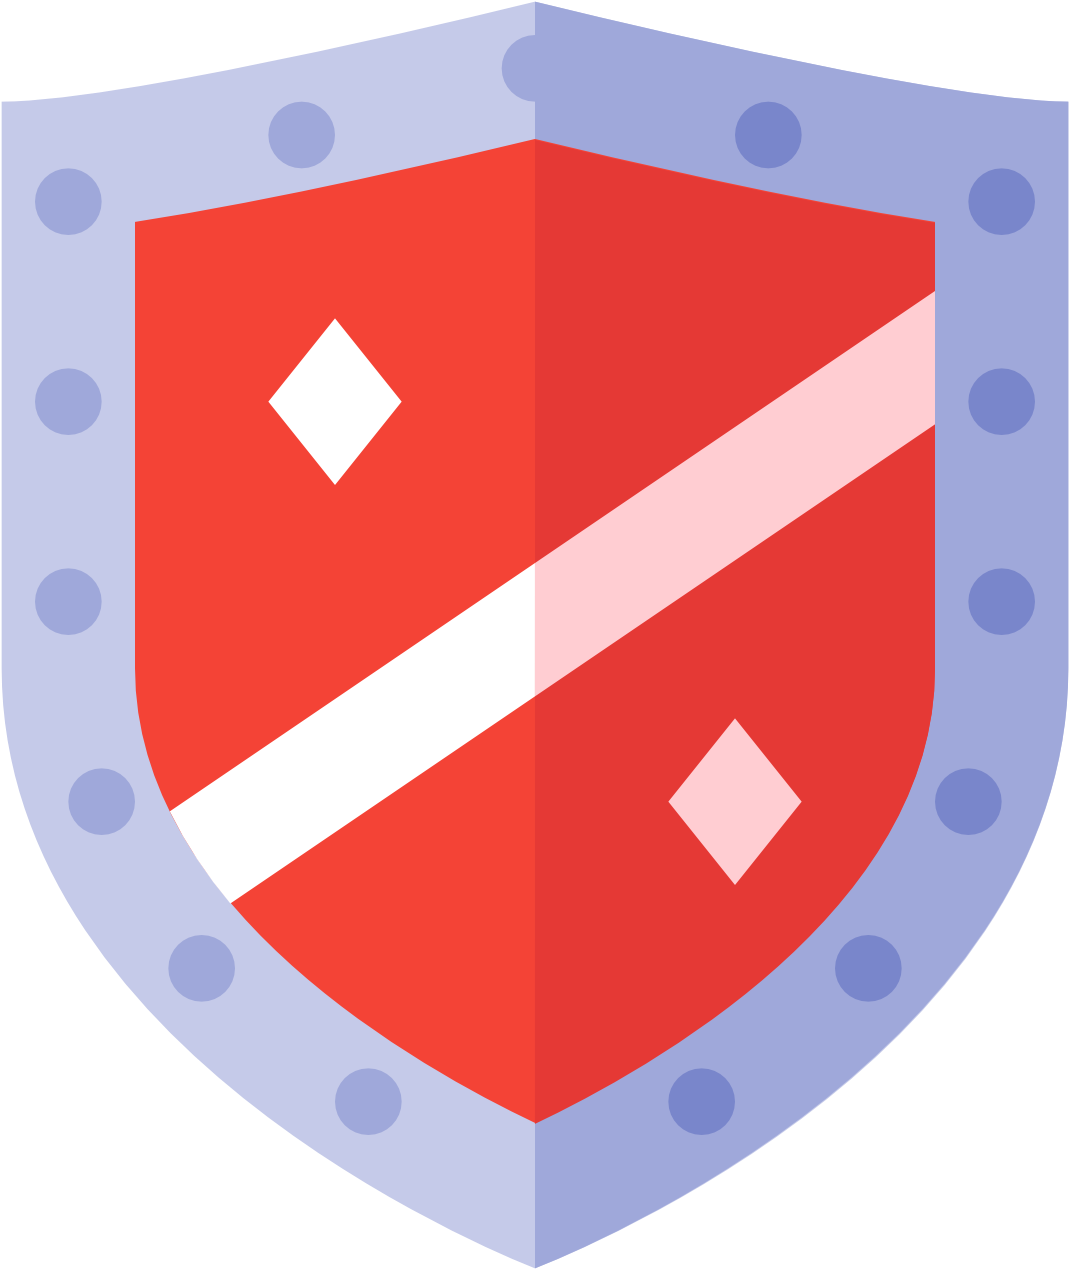 Src="https - //maxcdn - Icons8 - Shield1600 - Png" - Shield Material Icon Clipart (1600x1600), Png Download